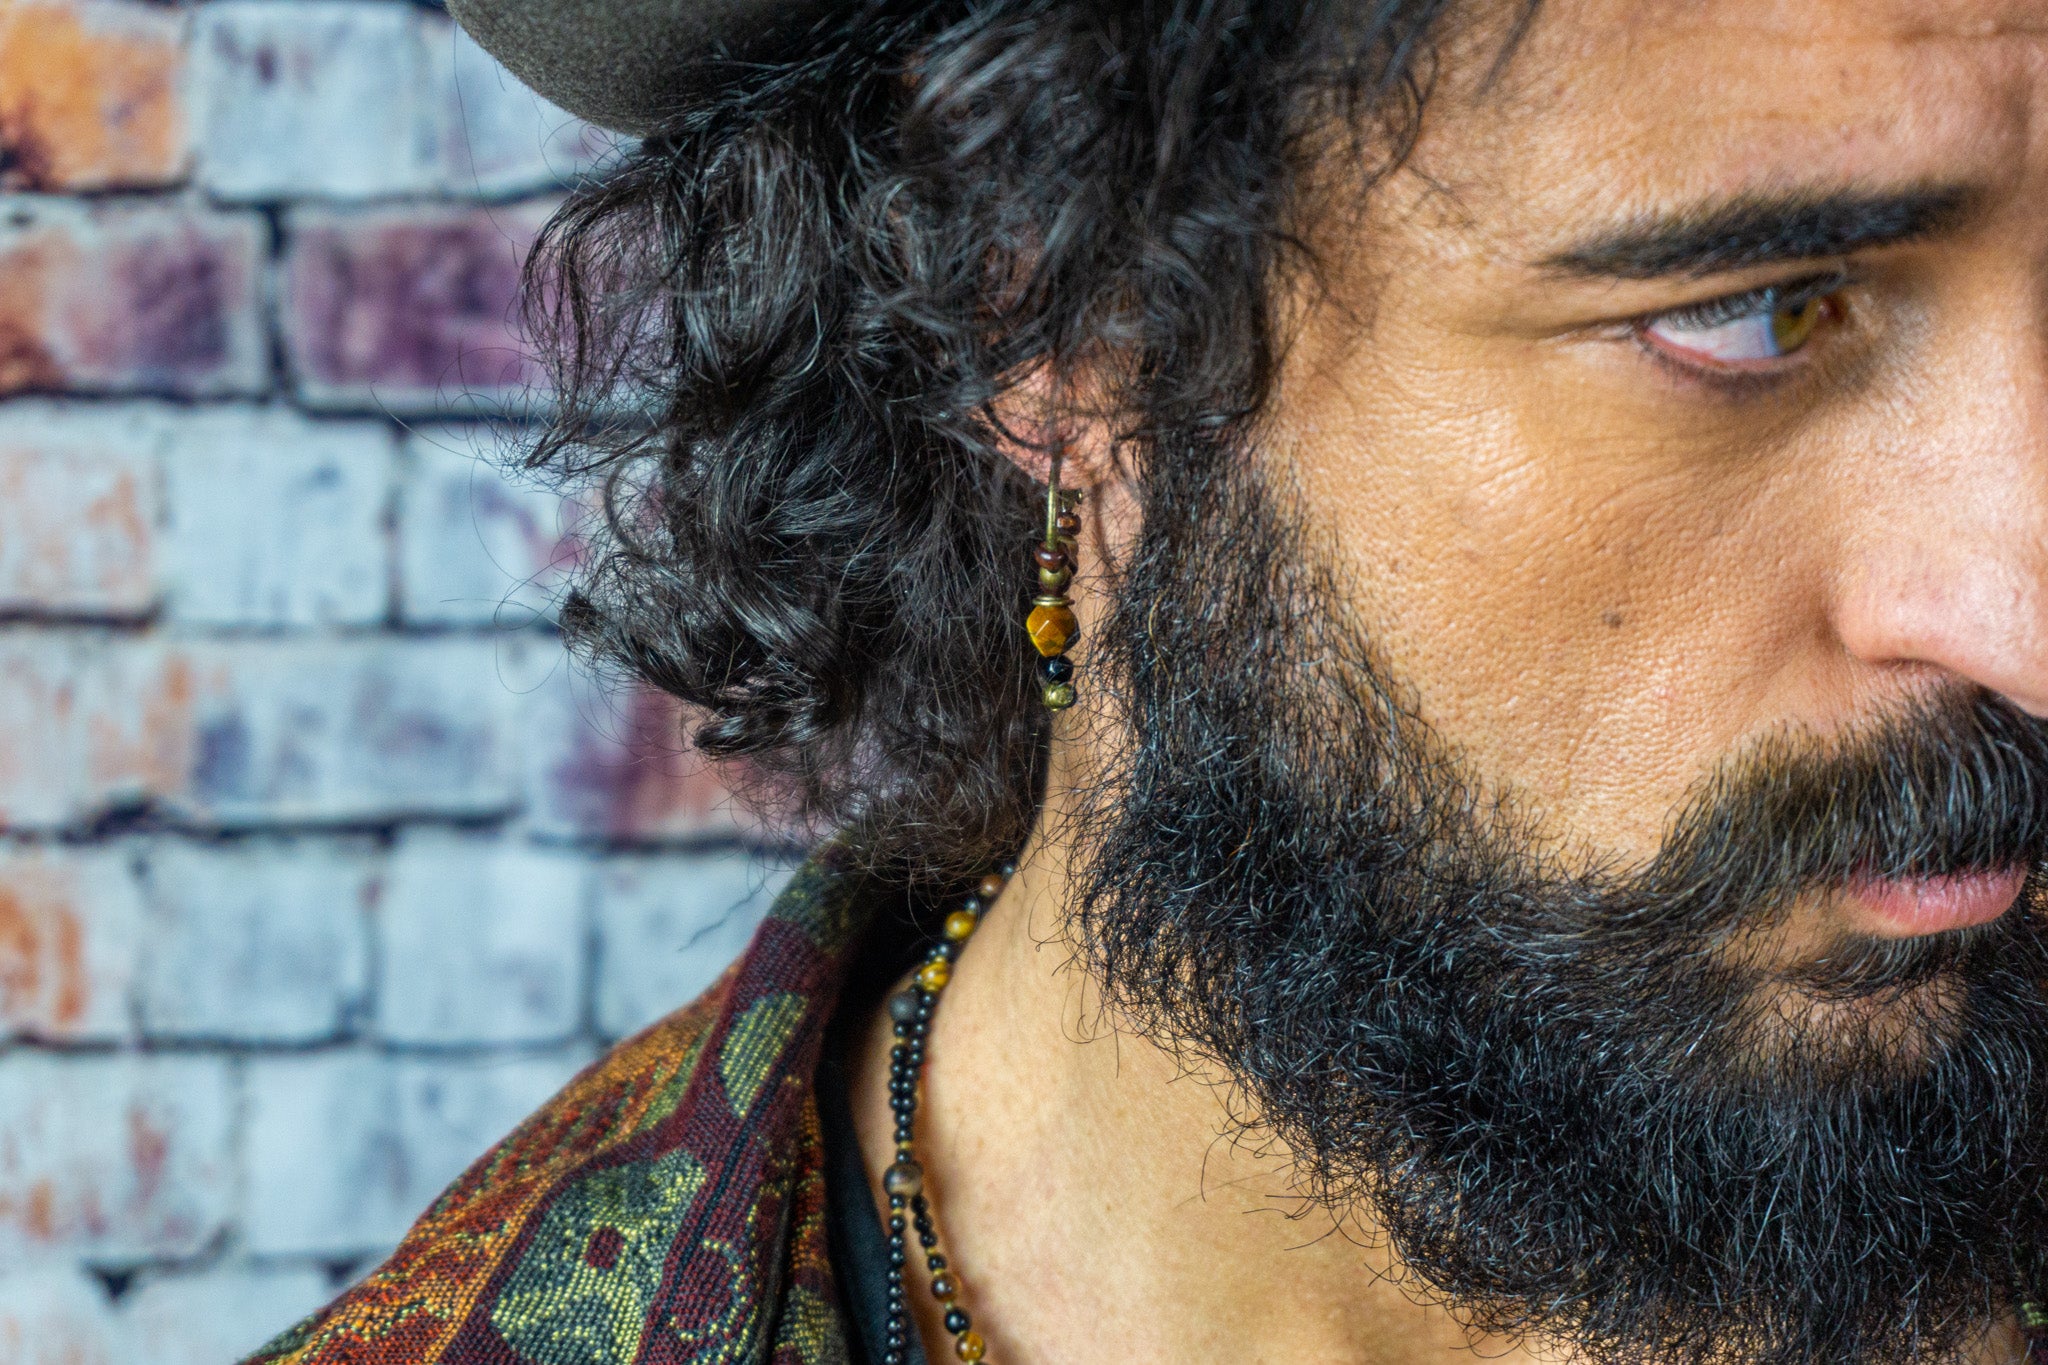 Multi faceted tiger eye stone earring with bronze hoop on a long haired man with a pirate hat and a golden vest